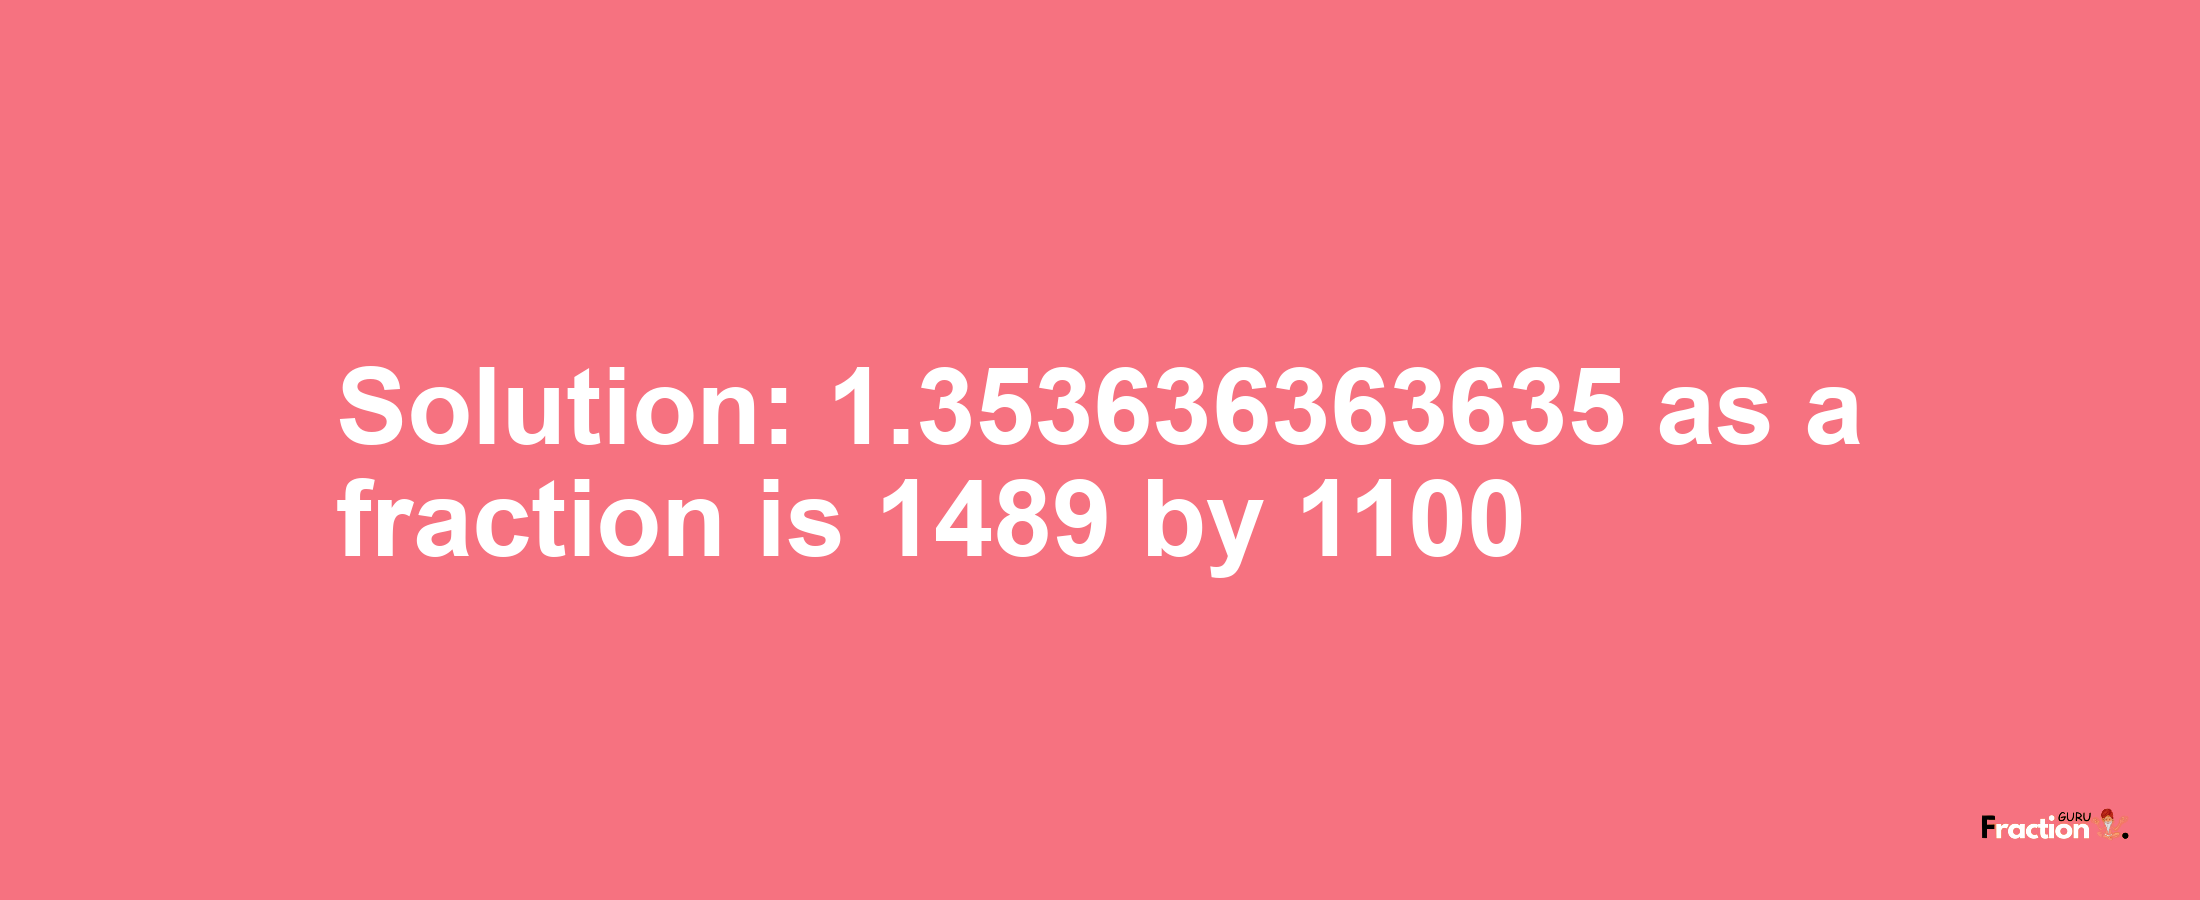 Solution:1.353636363635 as a fraction is 1489/1100